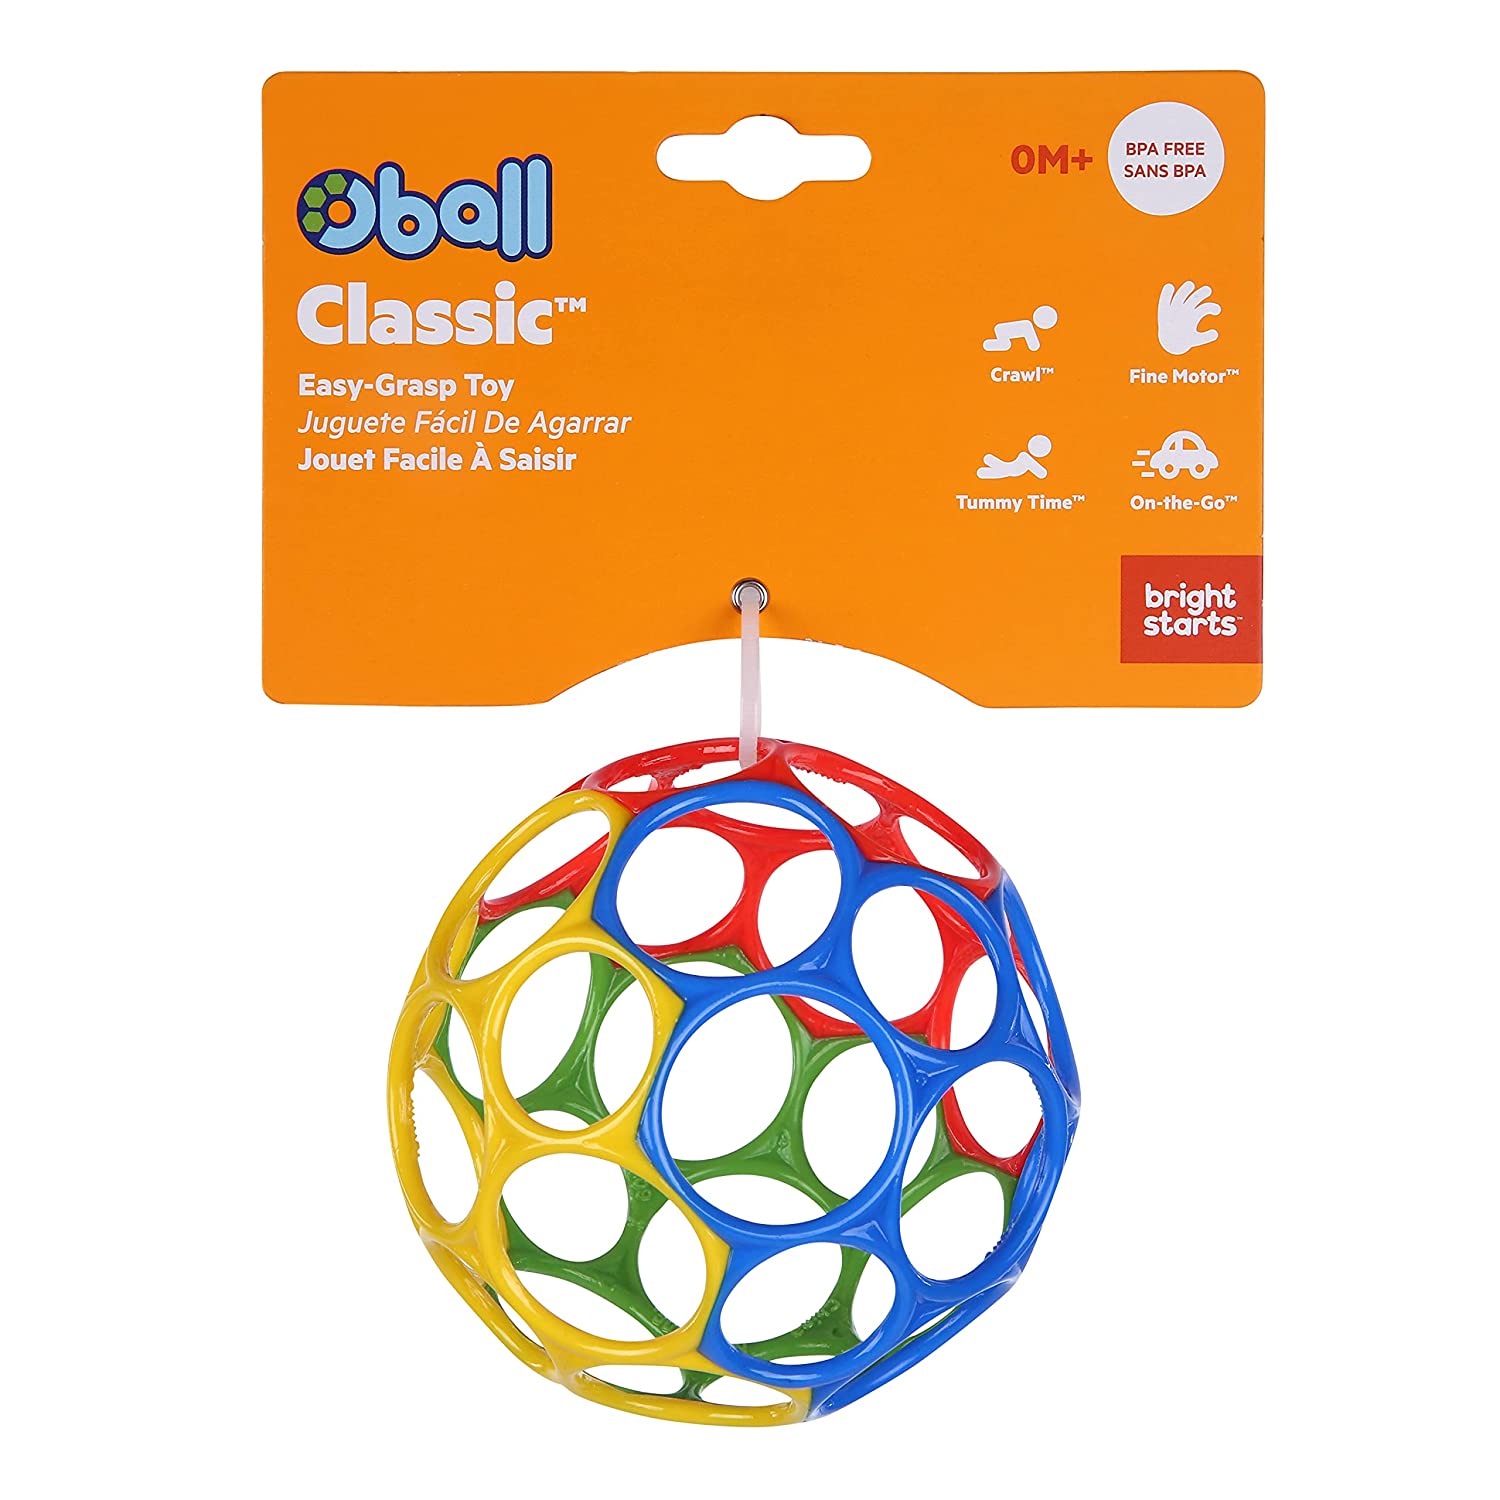 Oball Classic Ball - Red, Yellow, Green, Blue, Ages Newborn +